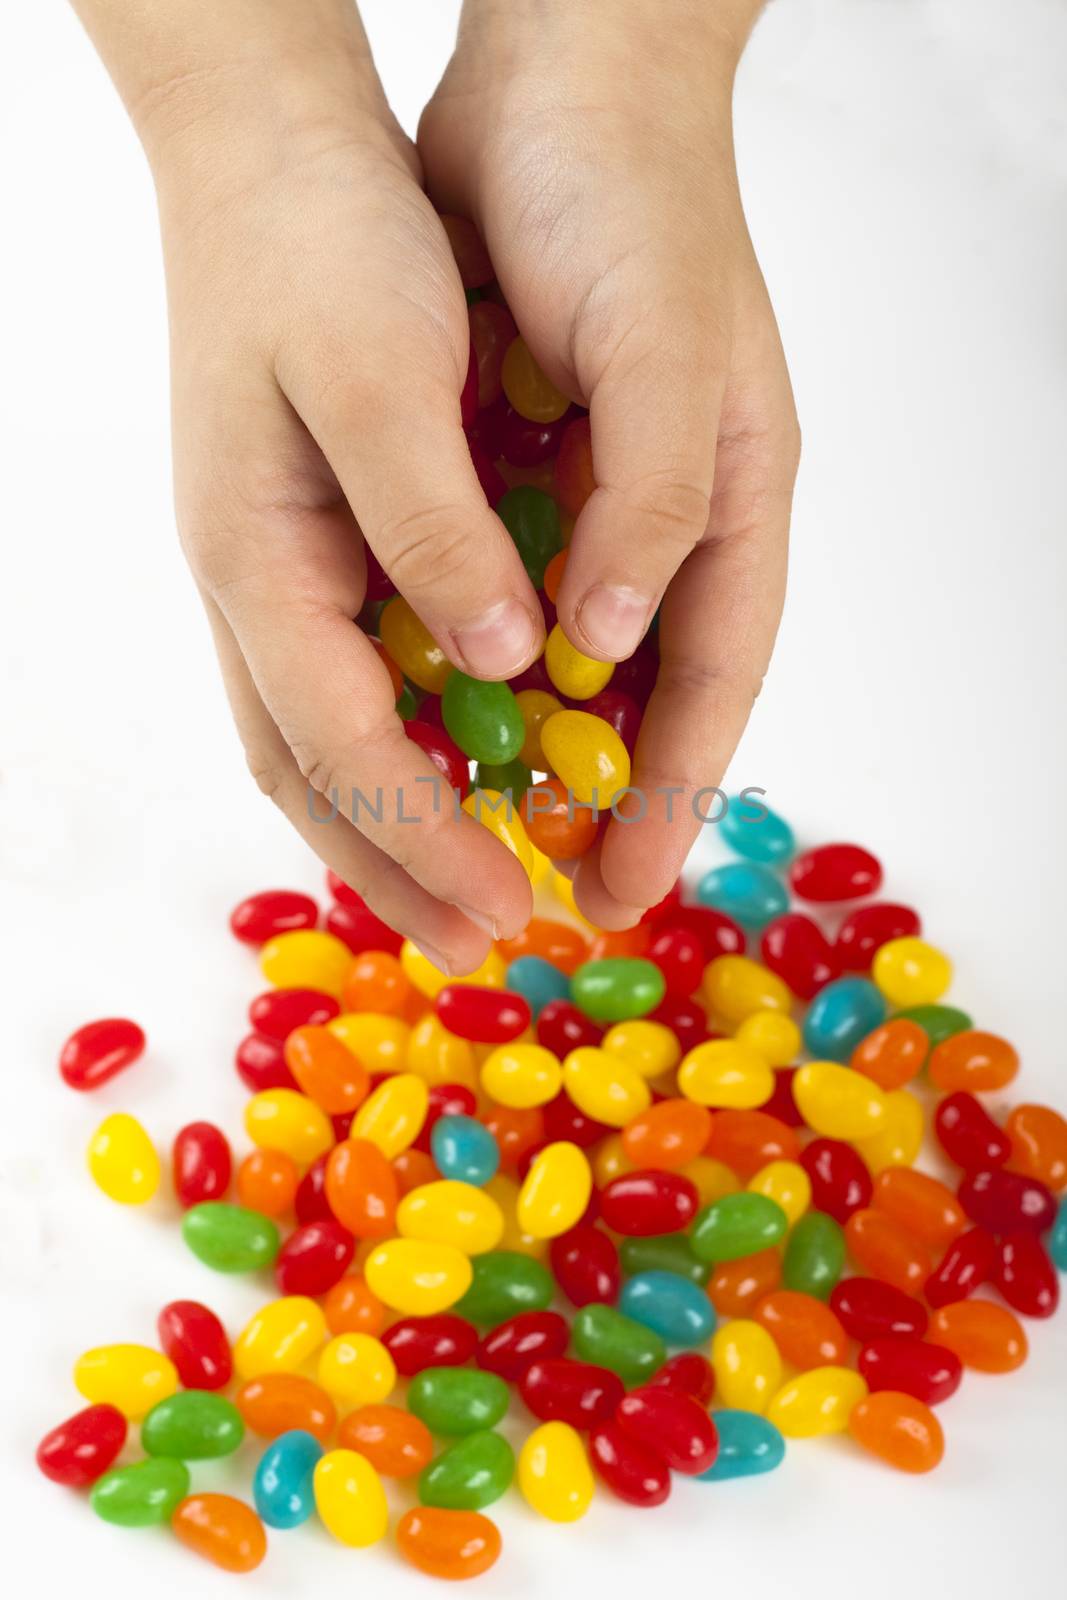 child holding colored candy with two hands on white background